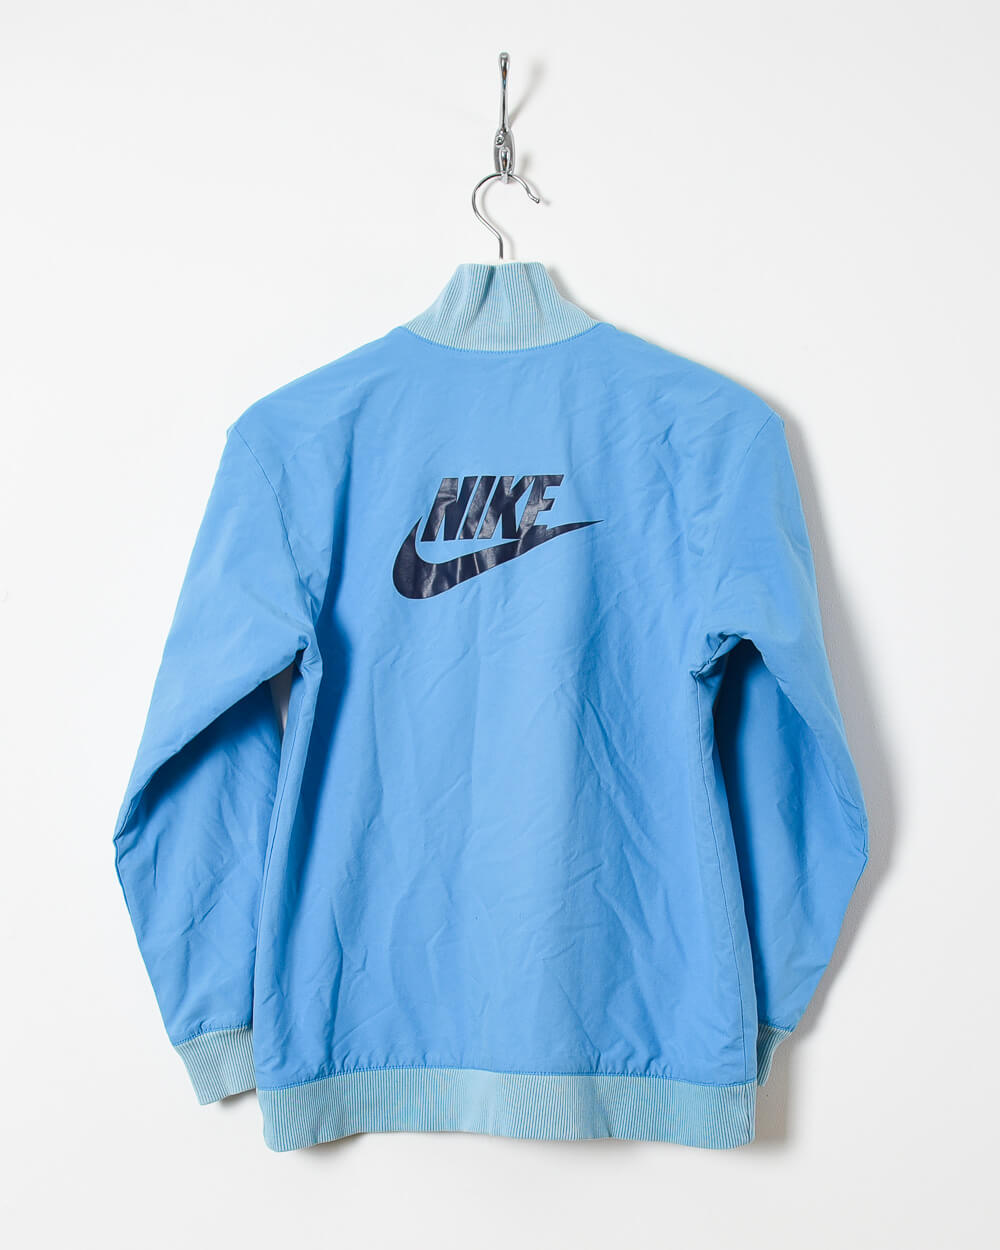 Nike Women's Tracksuit Top - Large - Domno Vintage 90s, 80s, 00s Retro and Vintage Clothing 